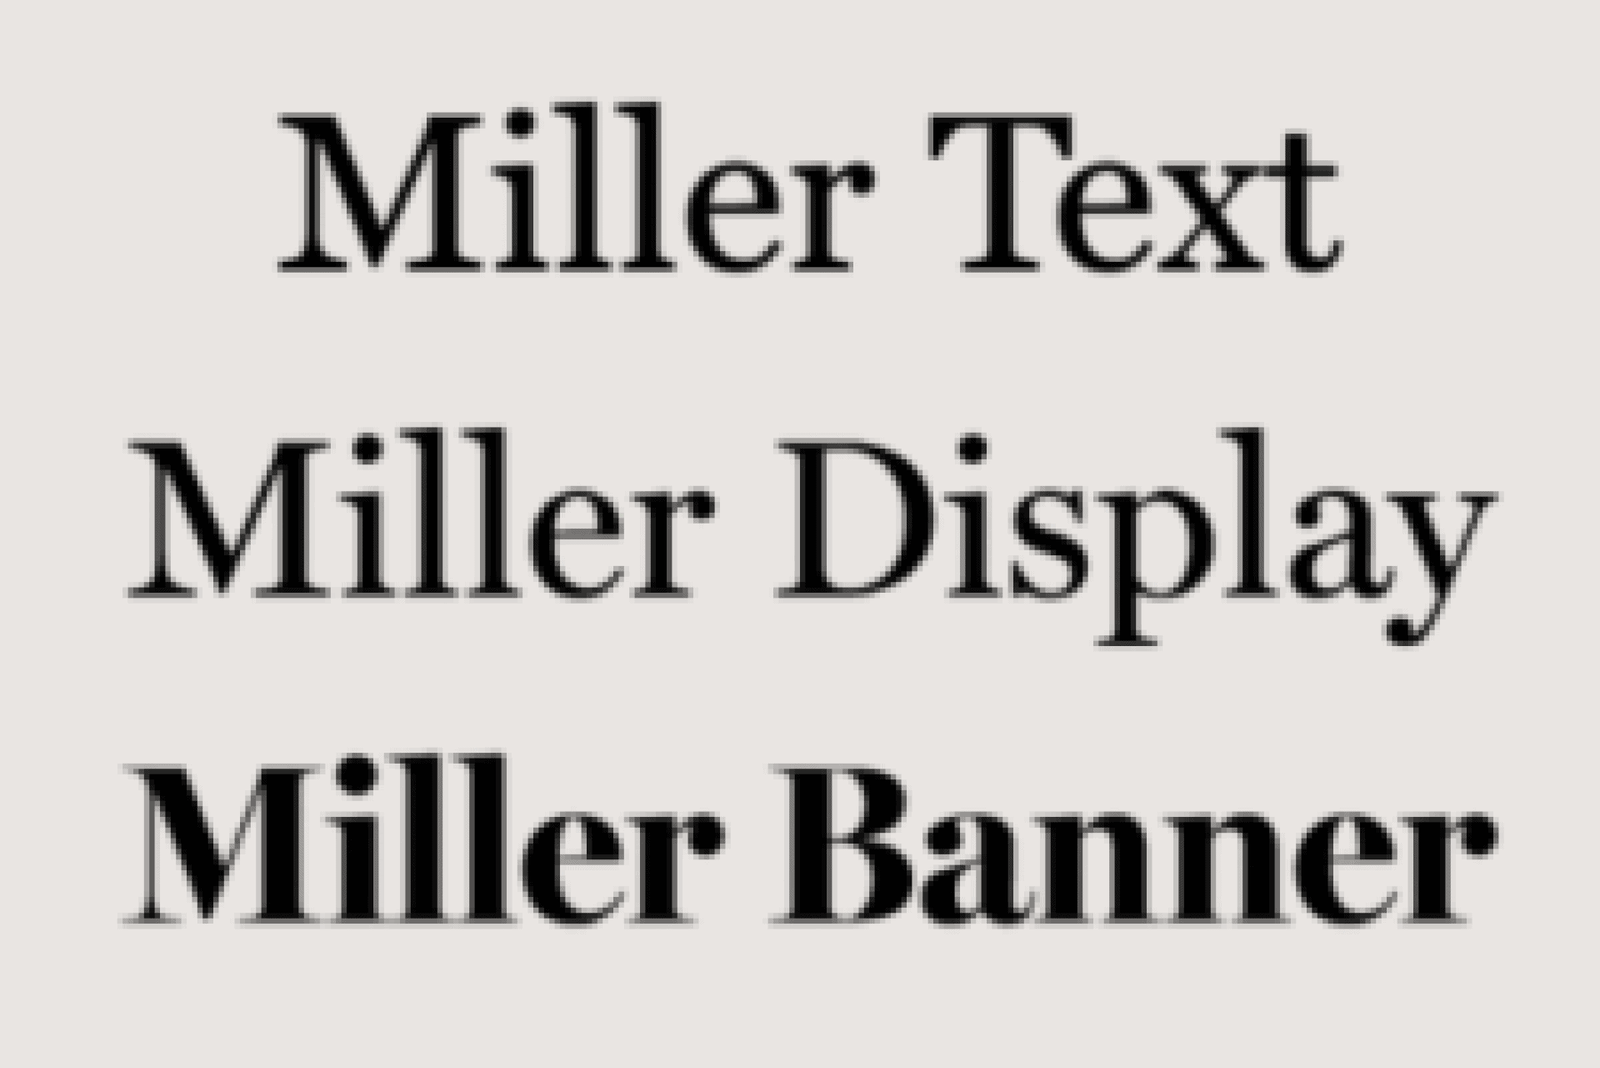 Text Fonts And Display Fonts